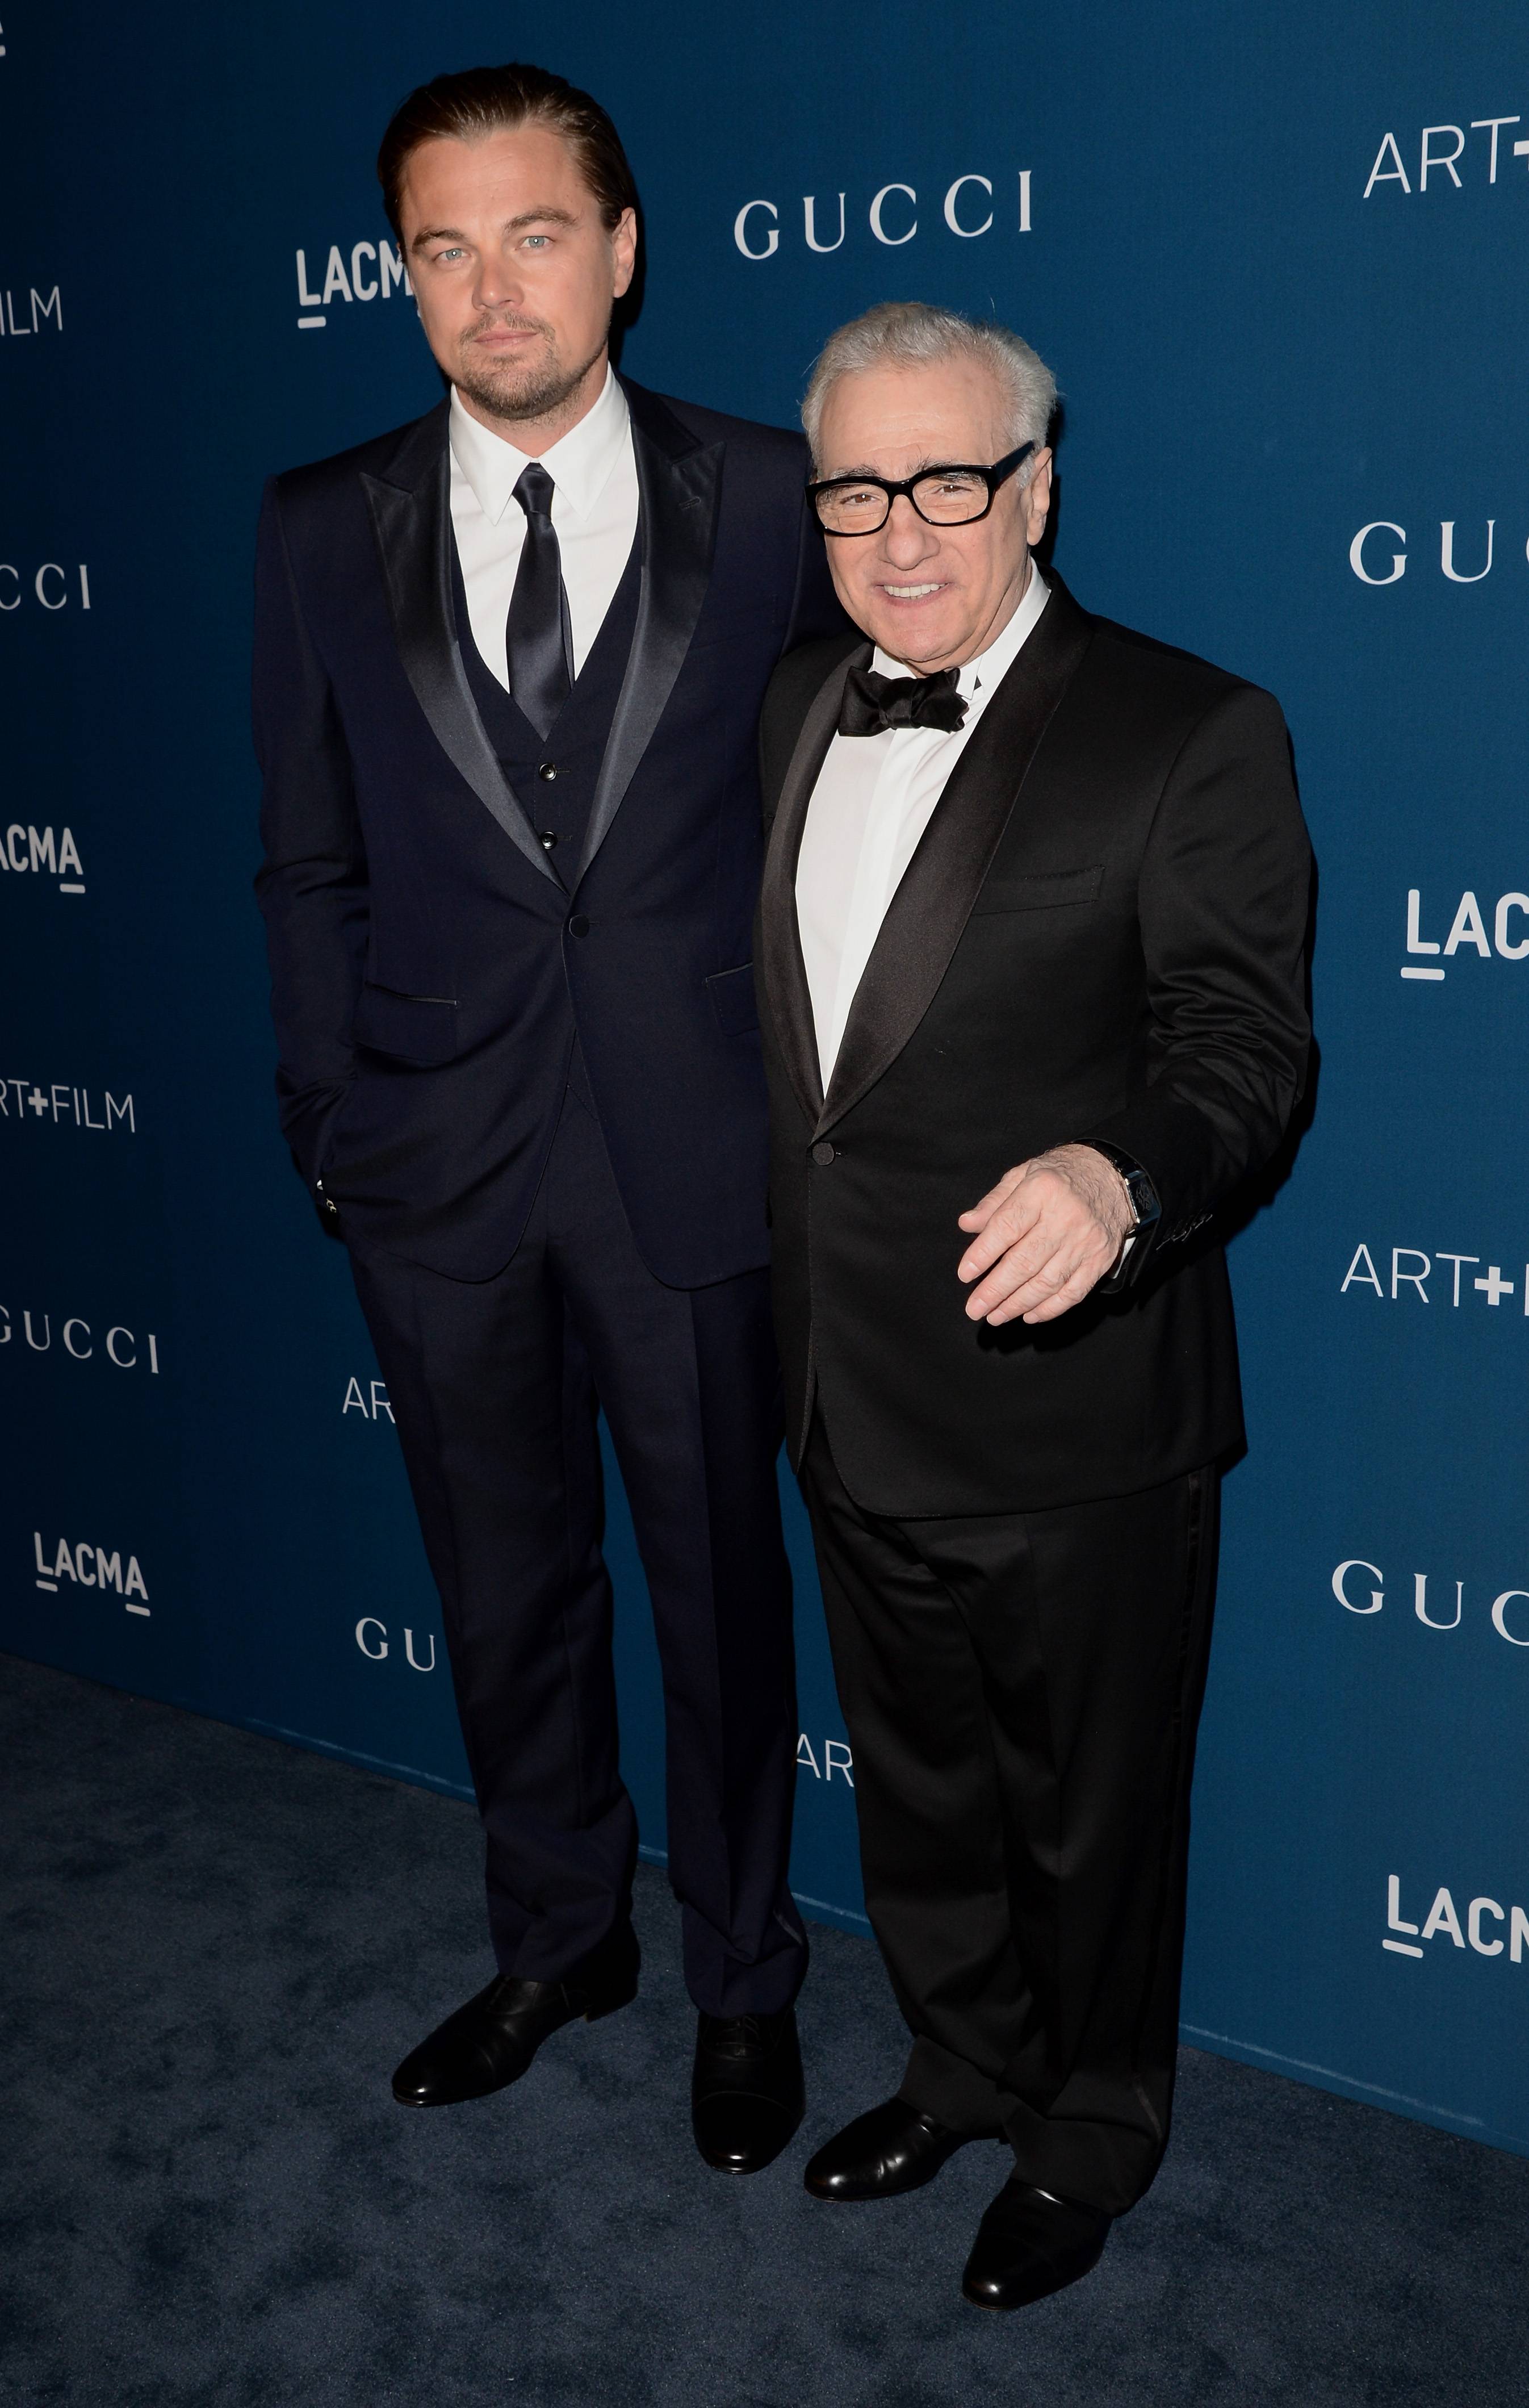 LACMA 2013 Art + Film Gala Honoring Martin Scorsese And David Hockney Presented By Gucci – Red Carpet